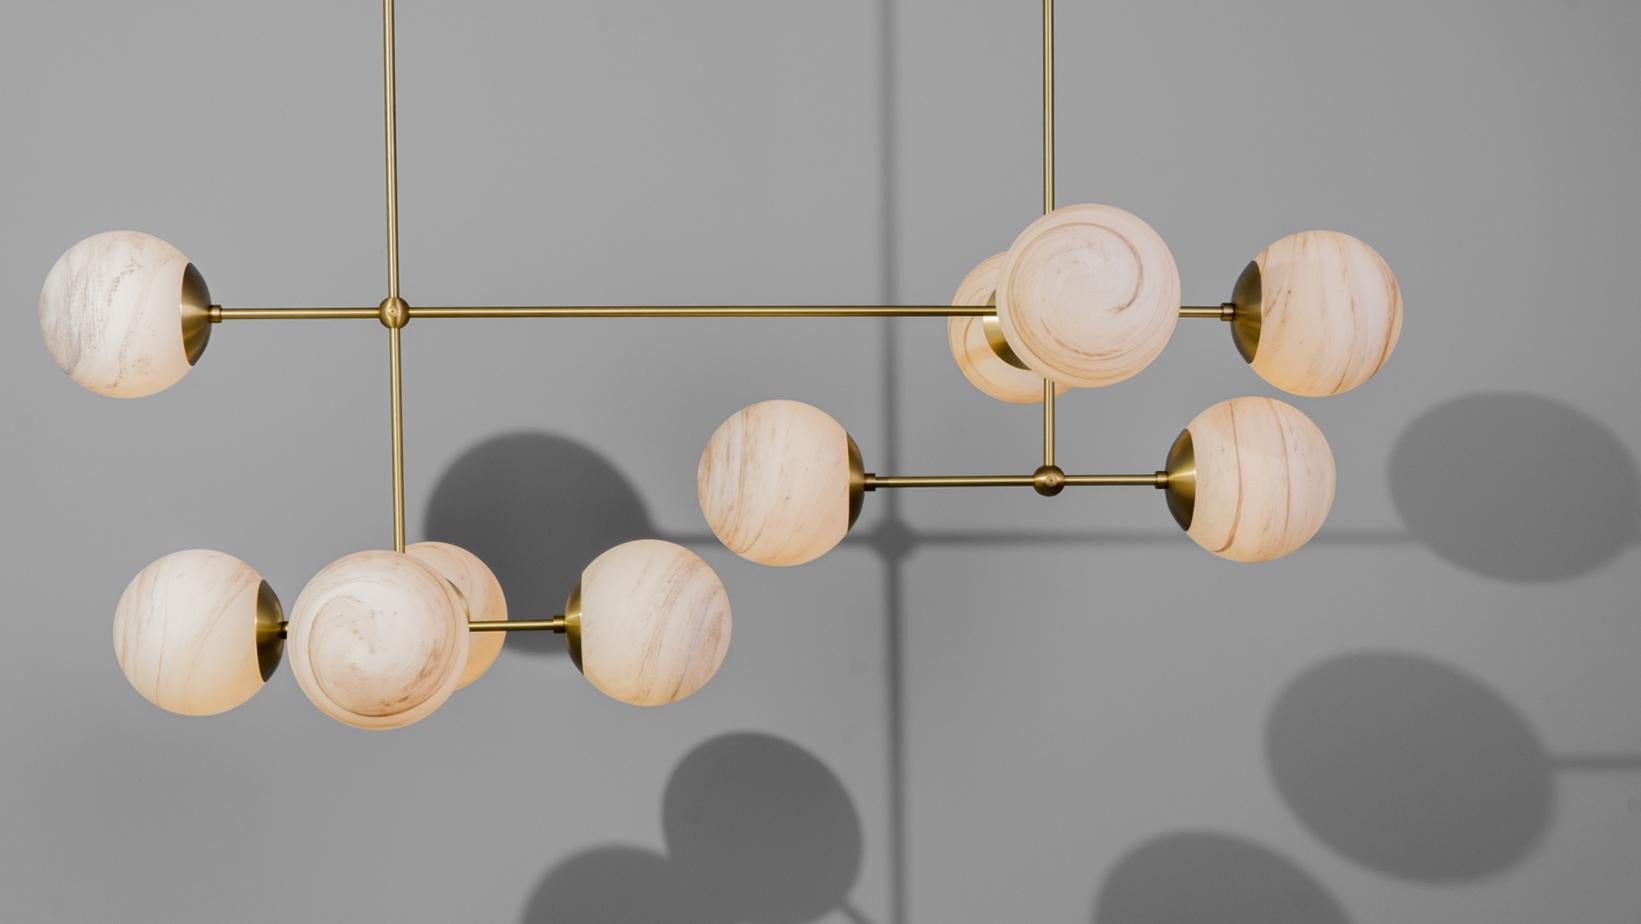 Armstrong Linear captures a sense of movement. Forms connect with spontaneous energy, punctuated by glass spheres. Linear elements complement the carefully crafted brass, echoing a reinforced internal skeleton.

Available in our three signature